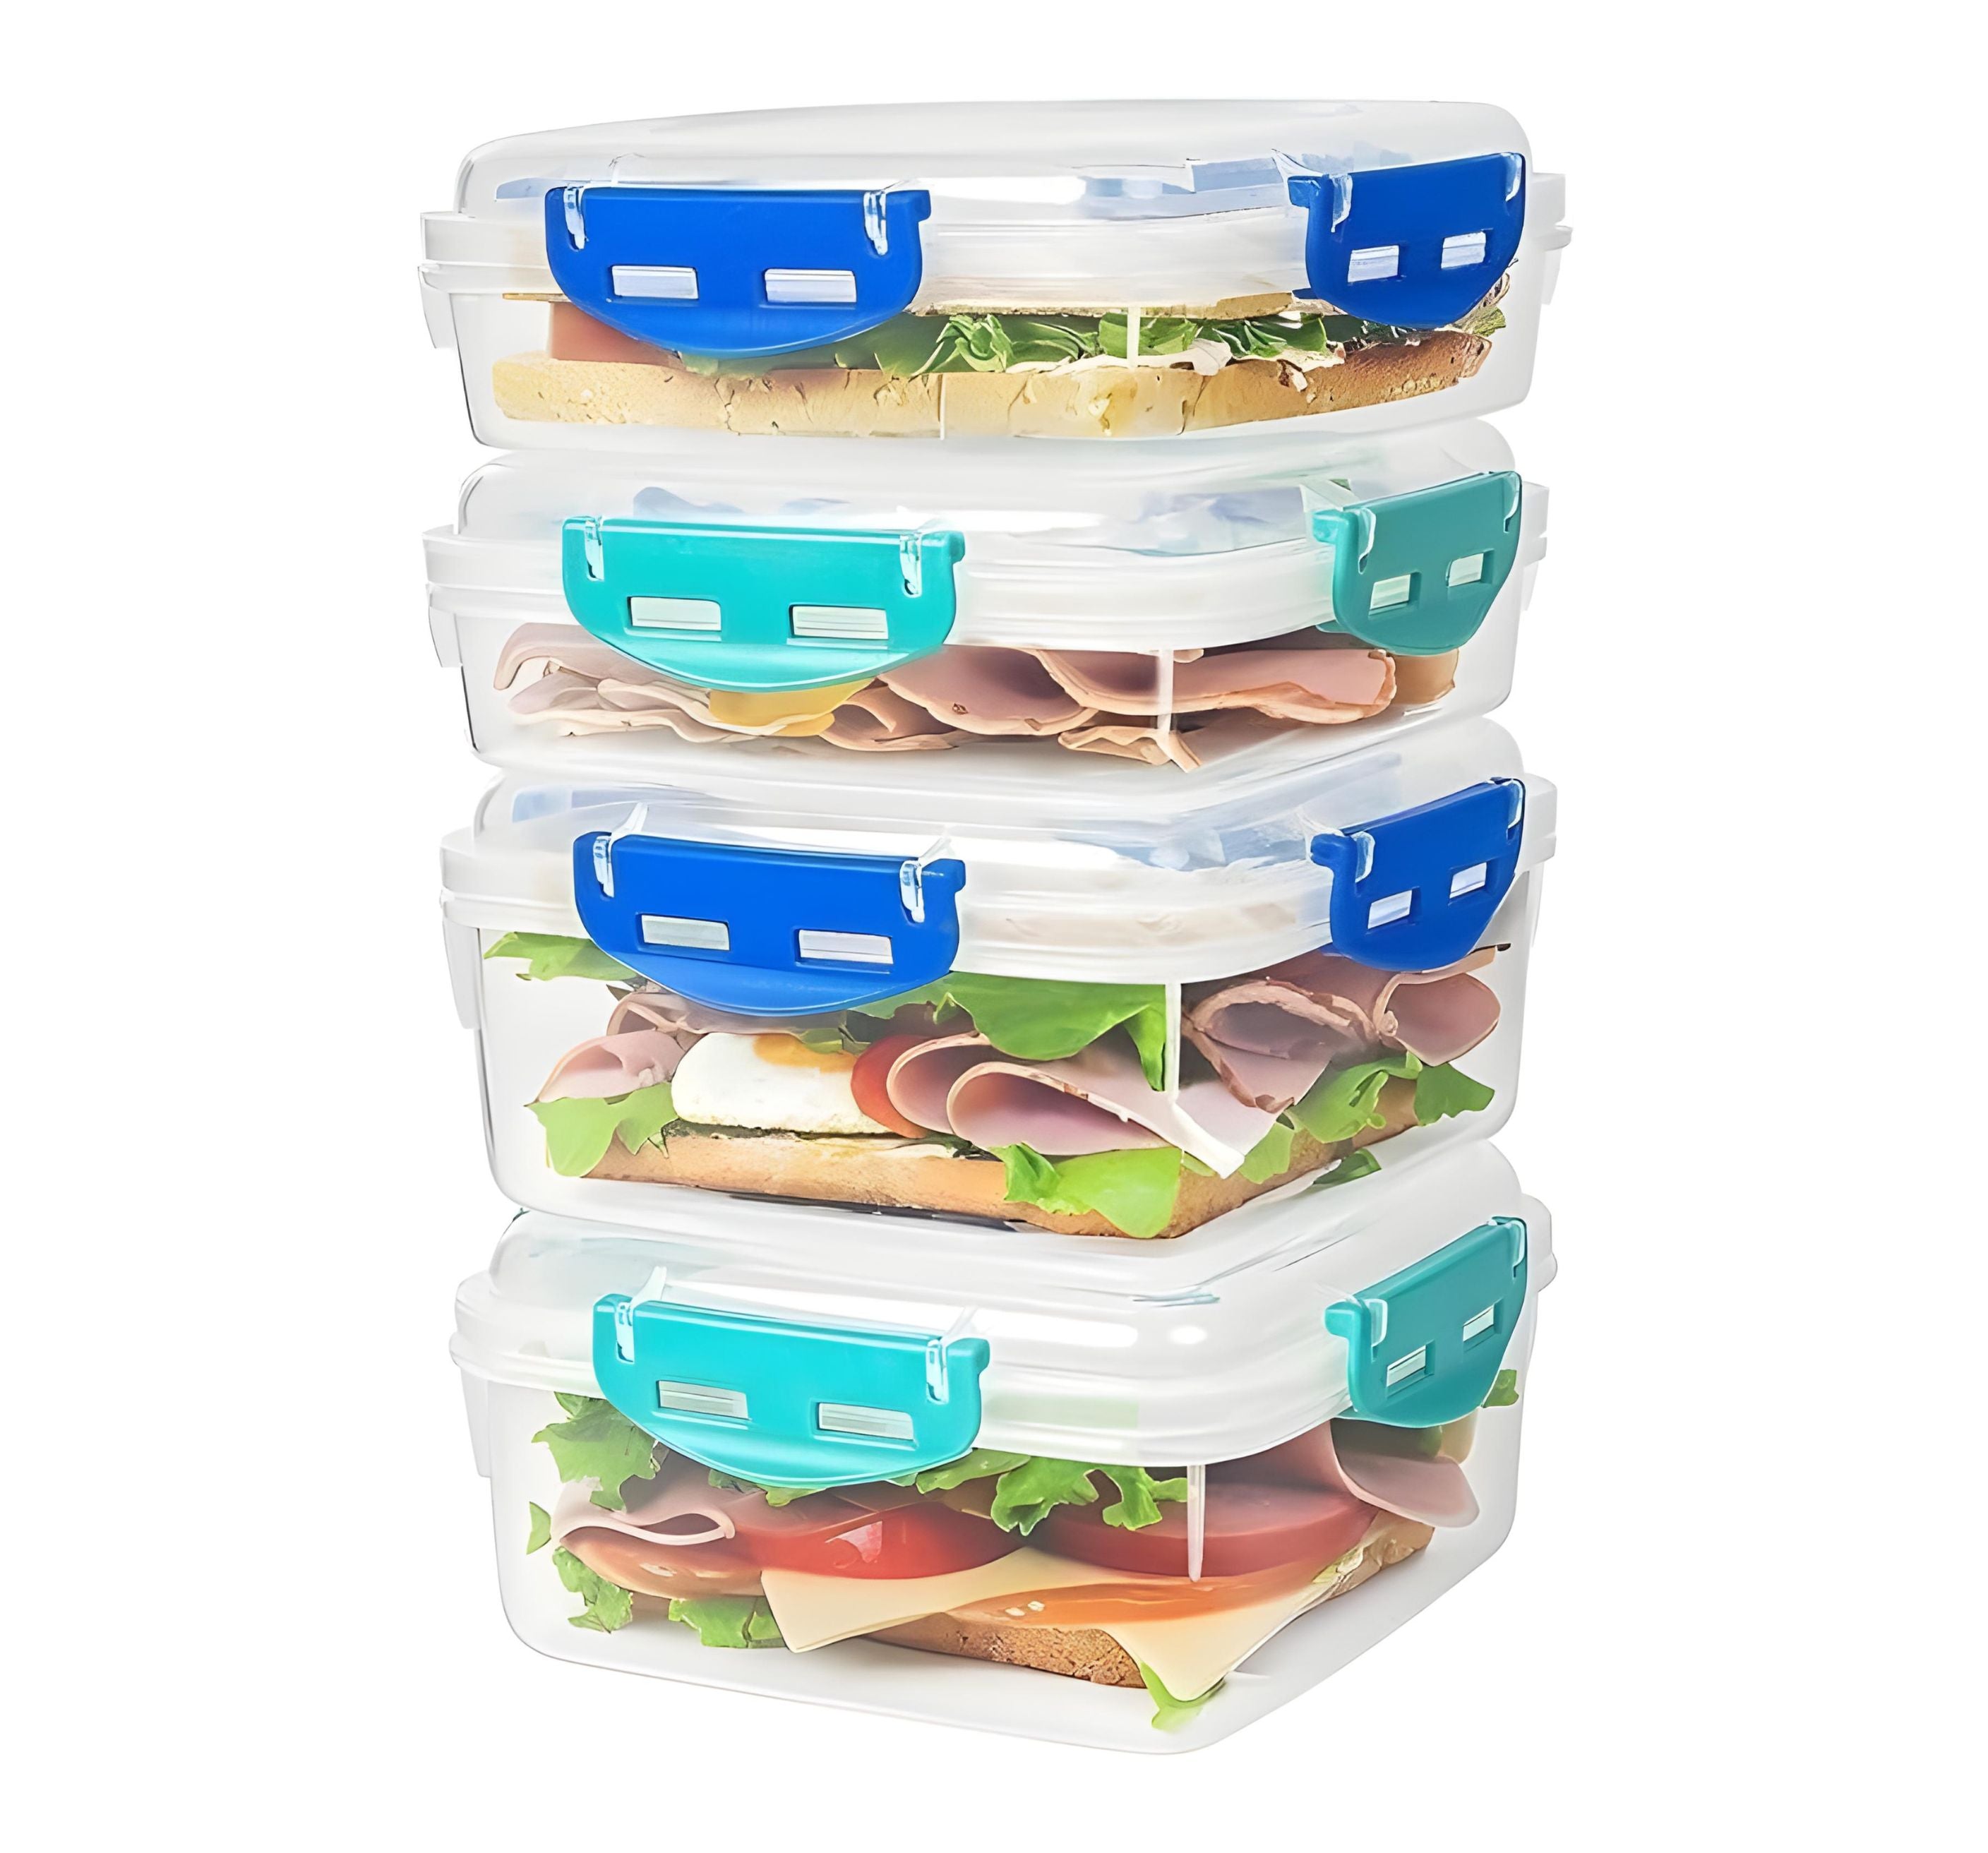 4 PCS Airtight BPA-Free Sandwich Containers - Microwave and Dishwasher Safe,